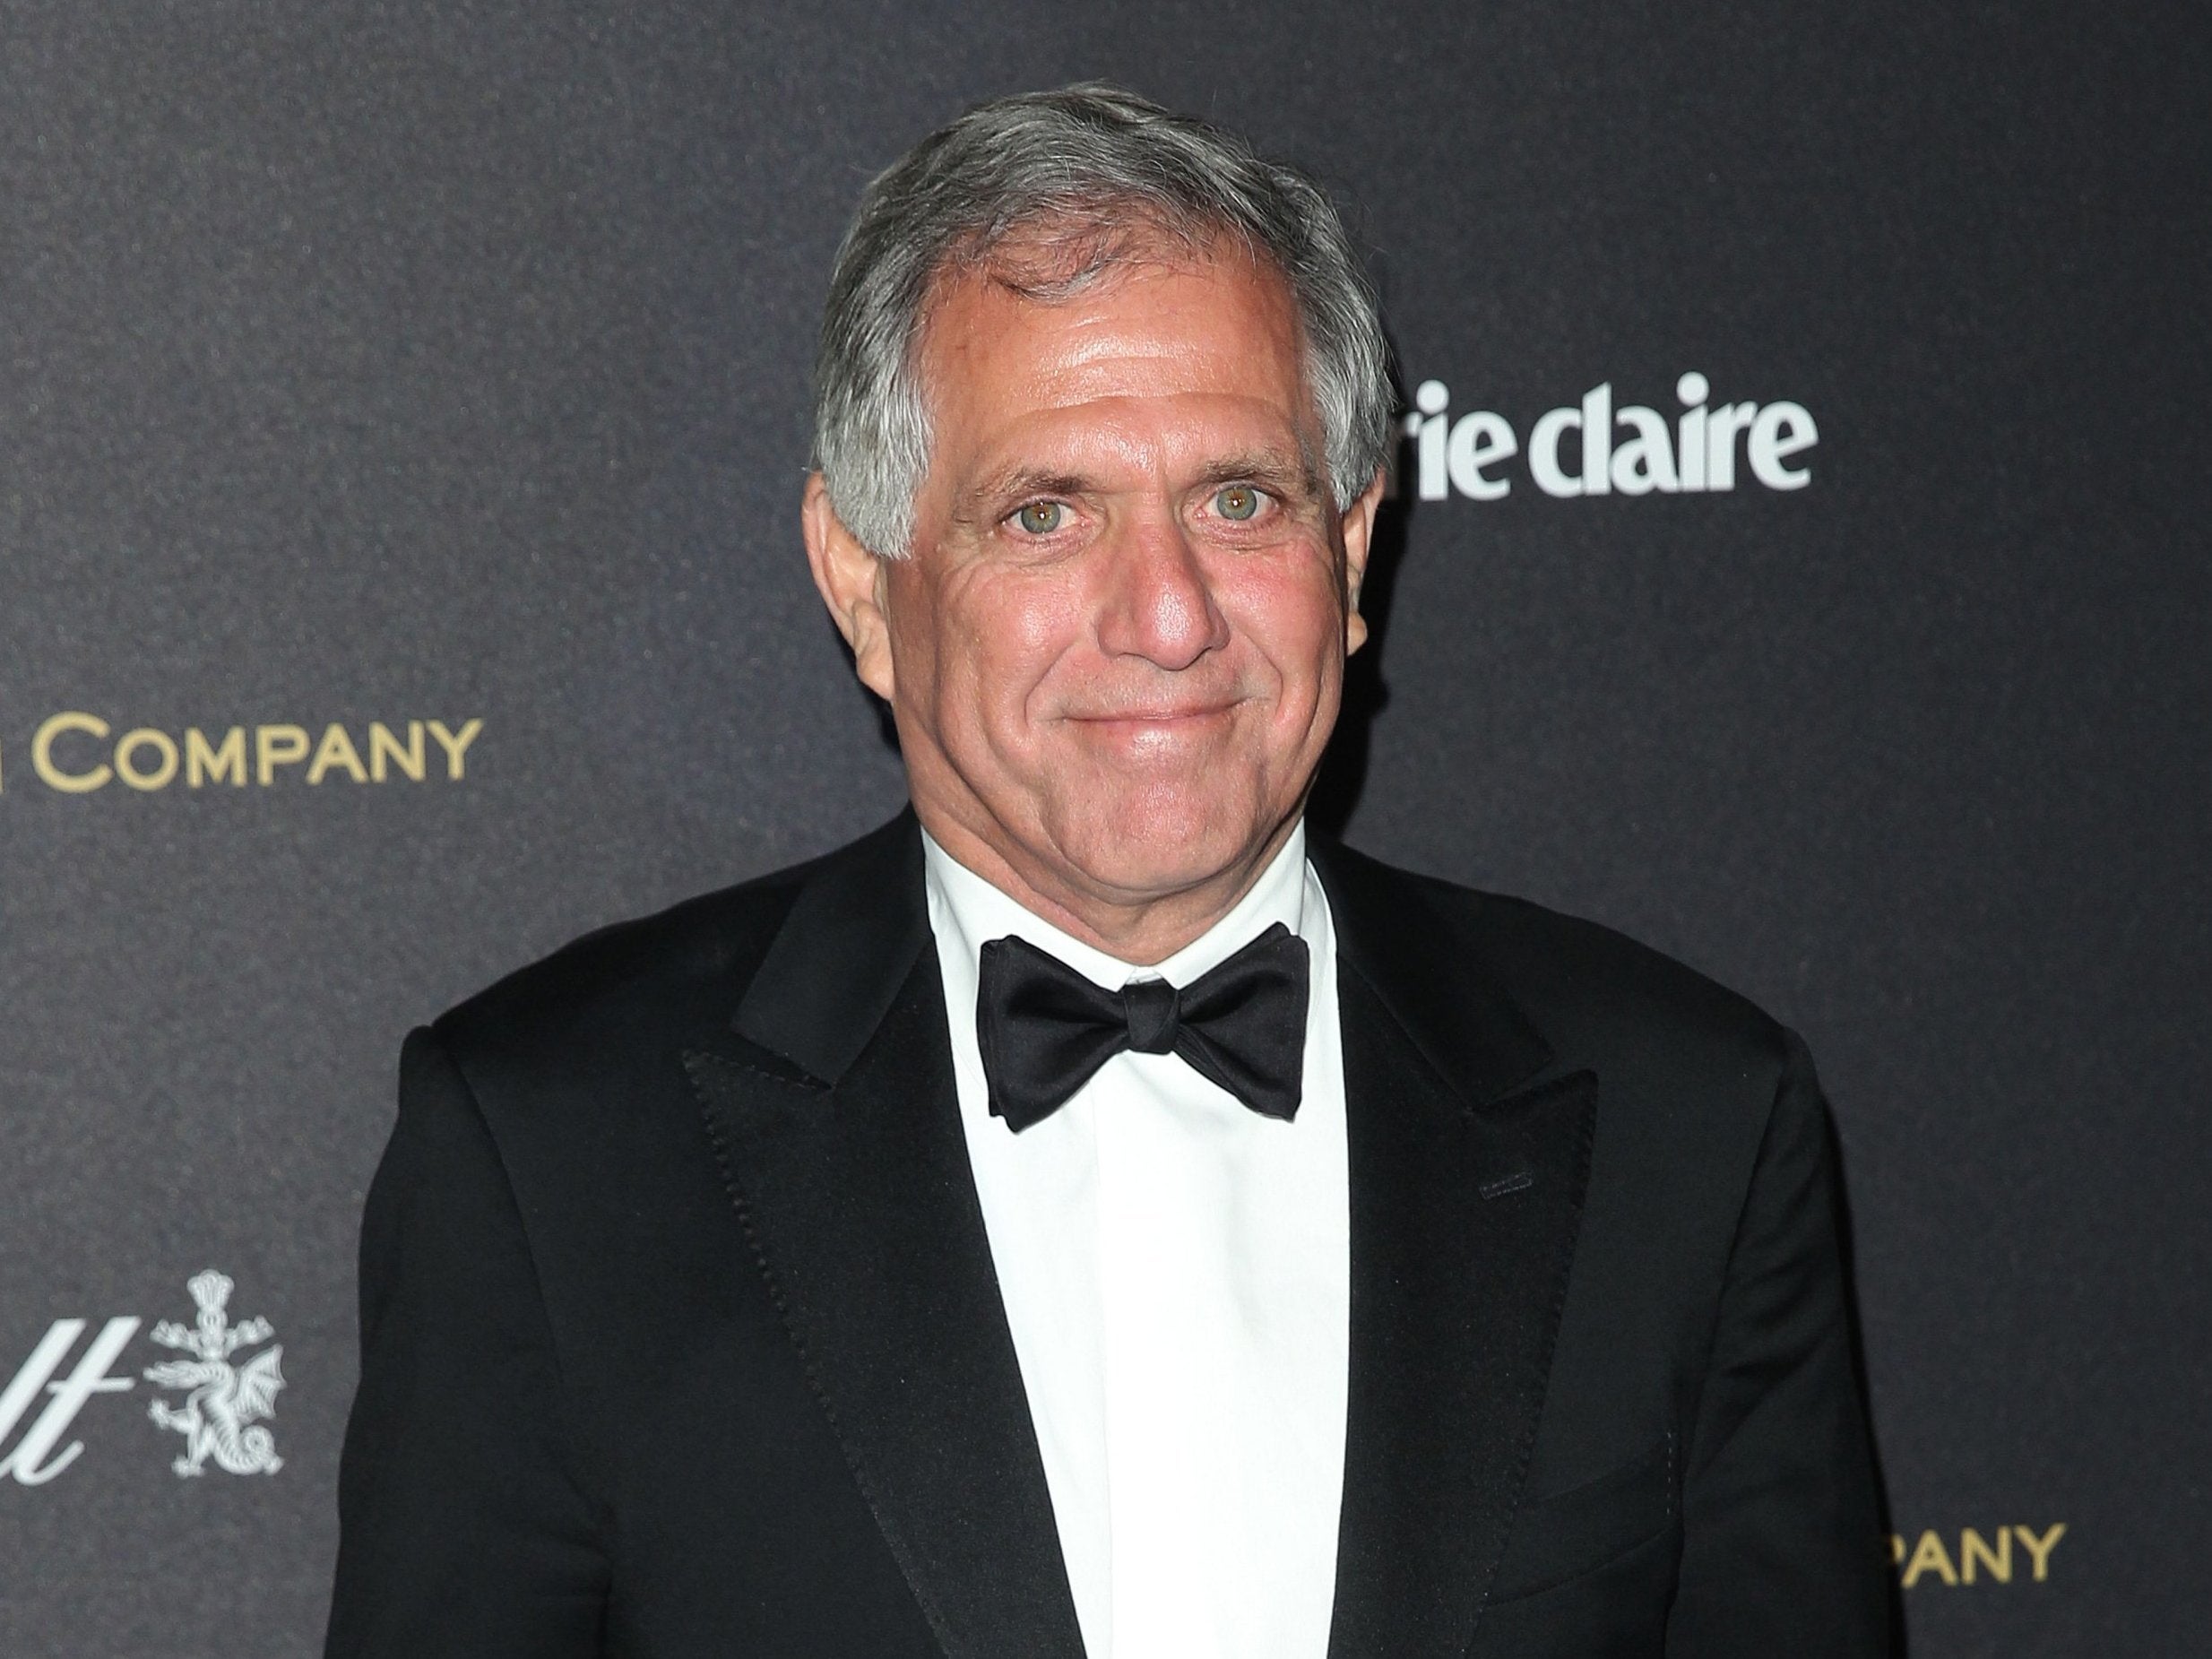 The investigation was announced ahead of a forthcoming report detail allegations against Mr Moonves